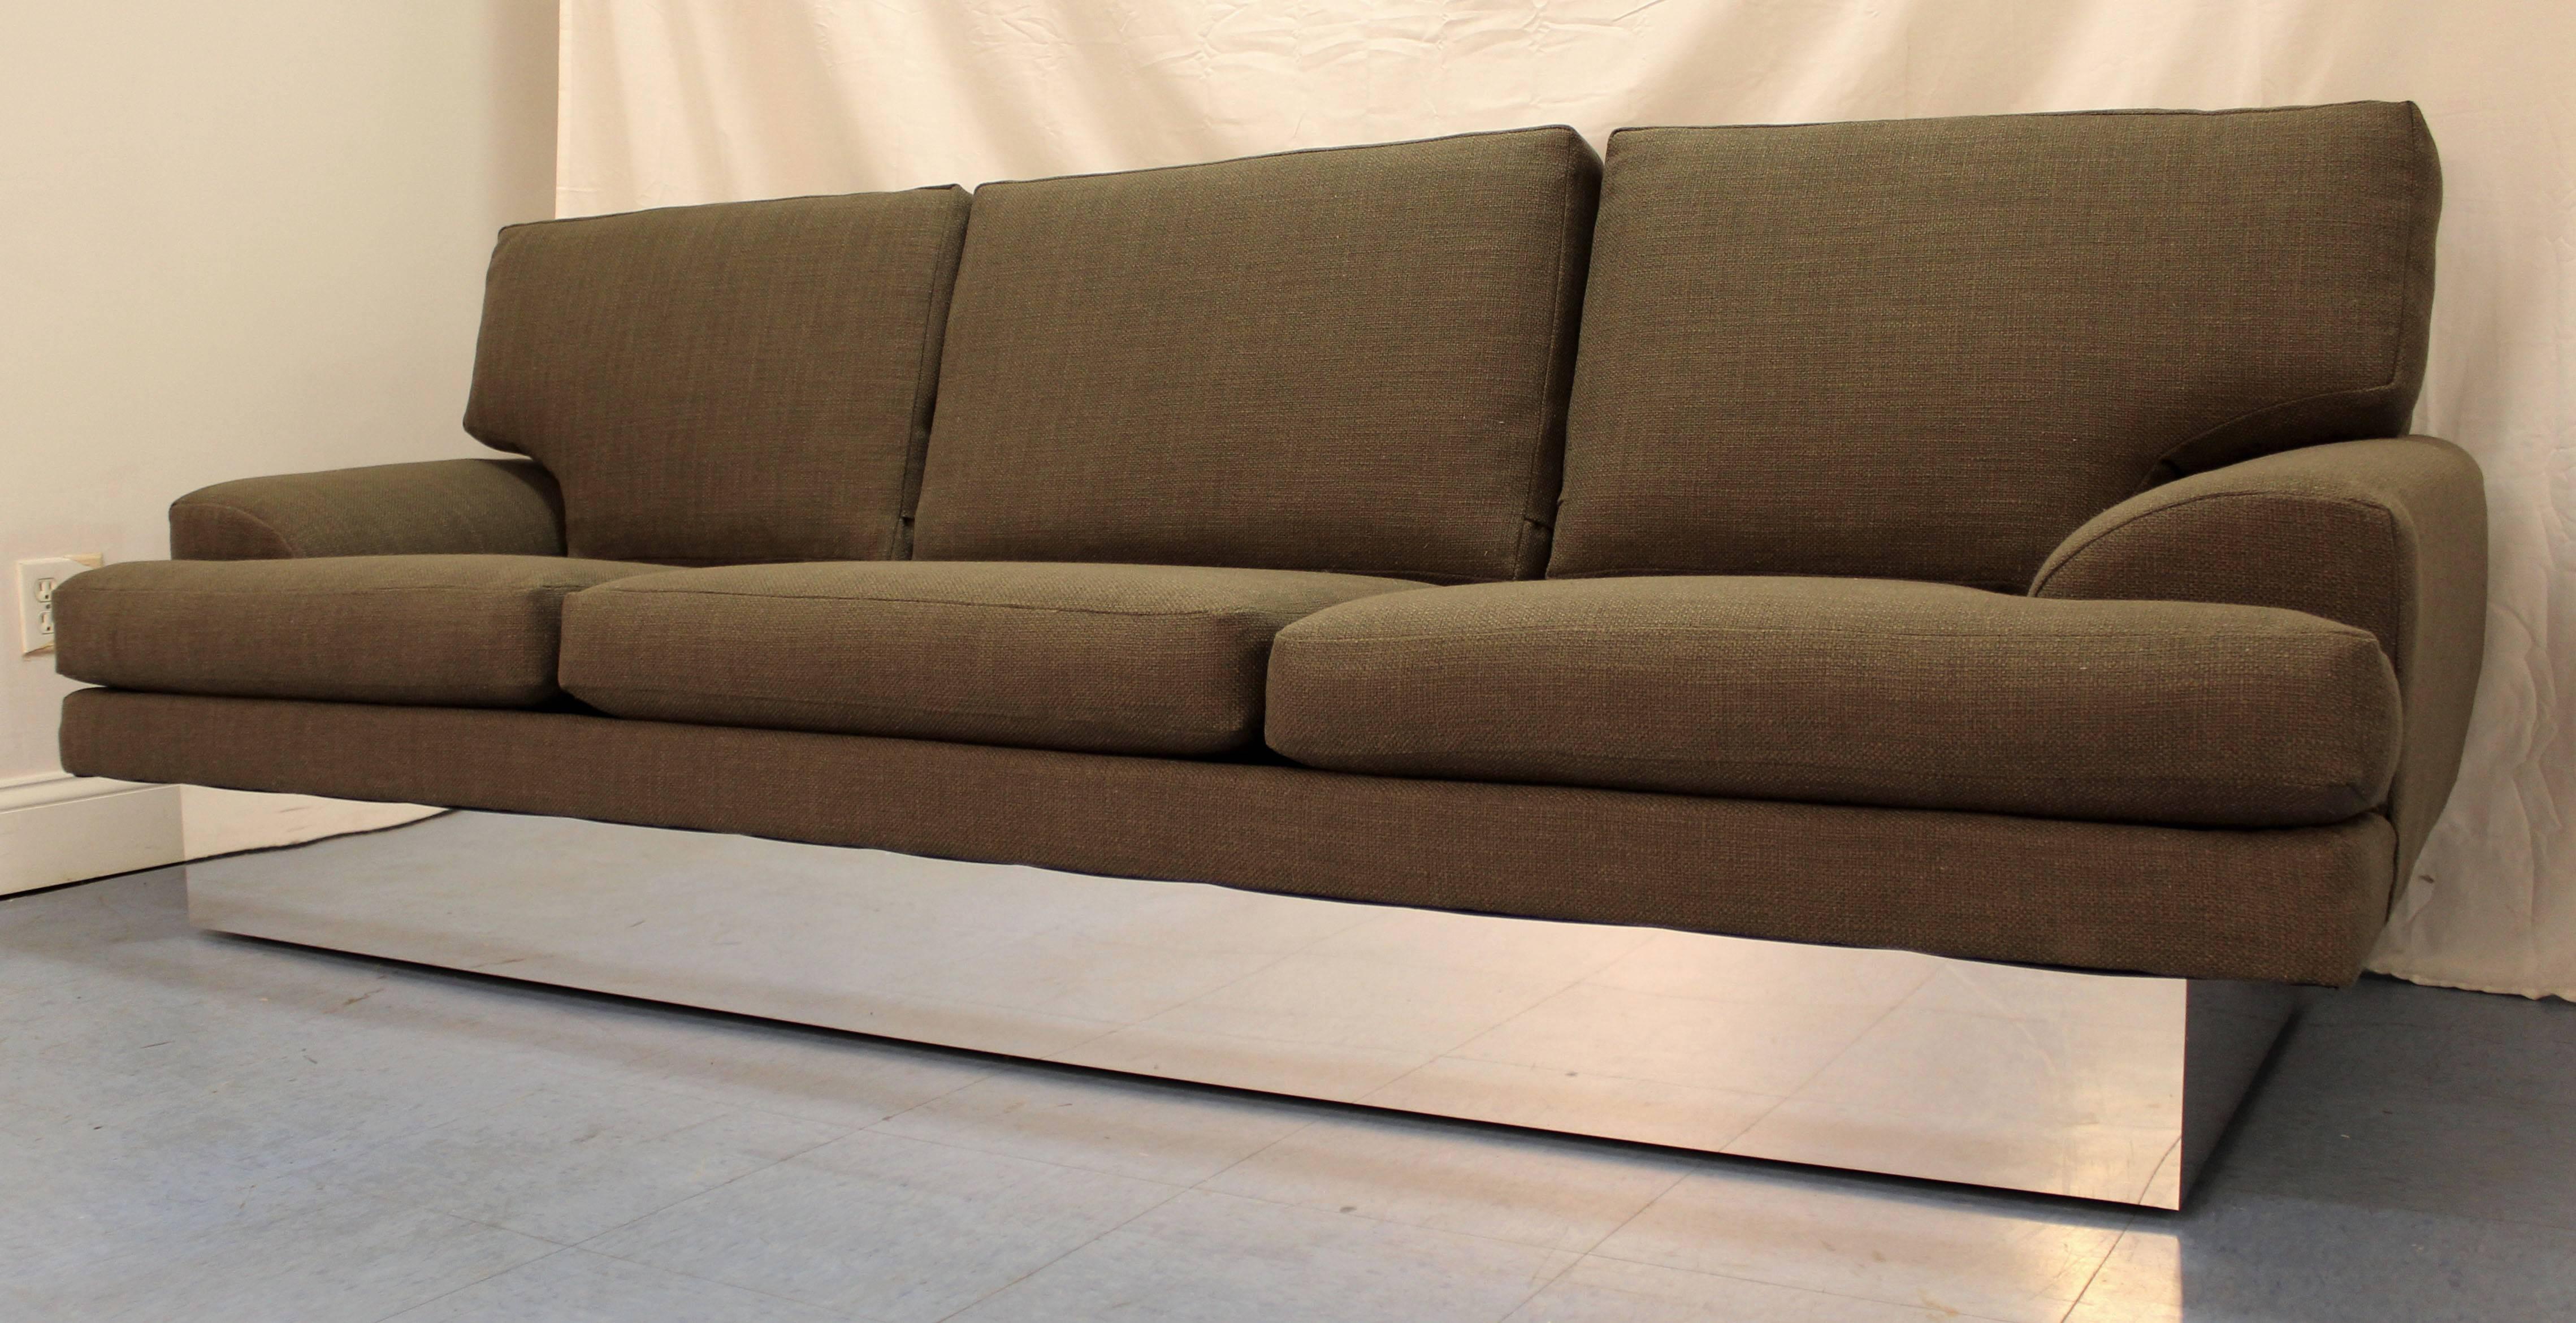 The sofa is in excellent condition and has been completely restored. The fabric color is 